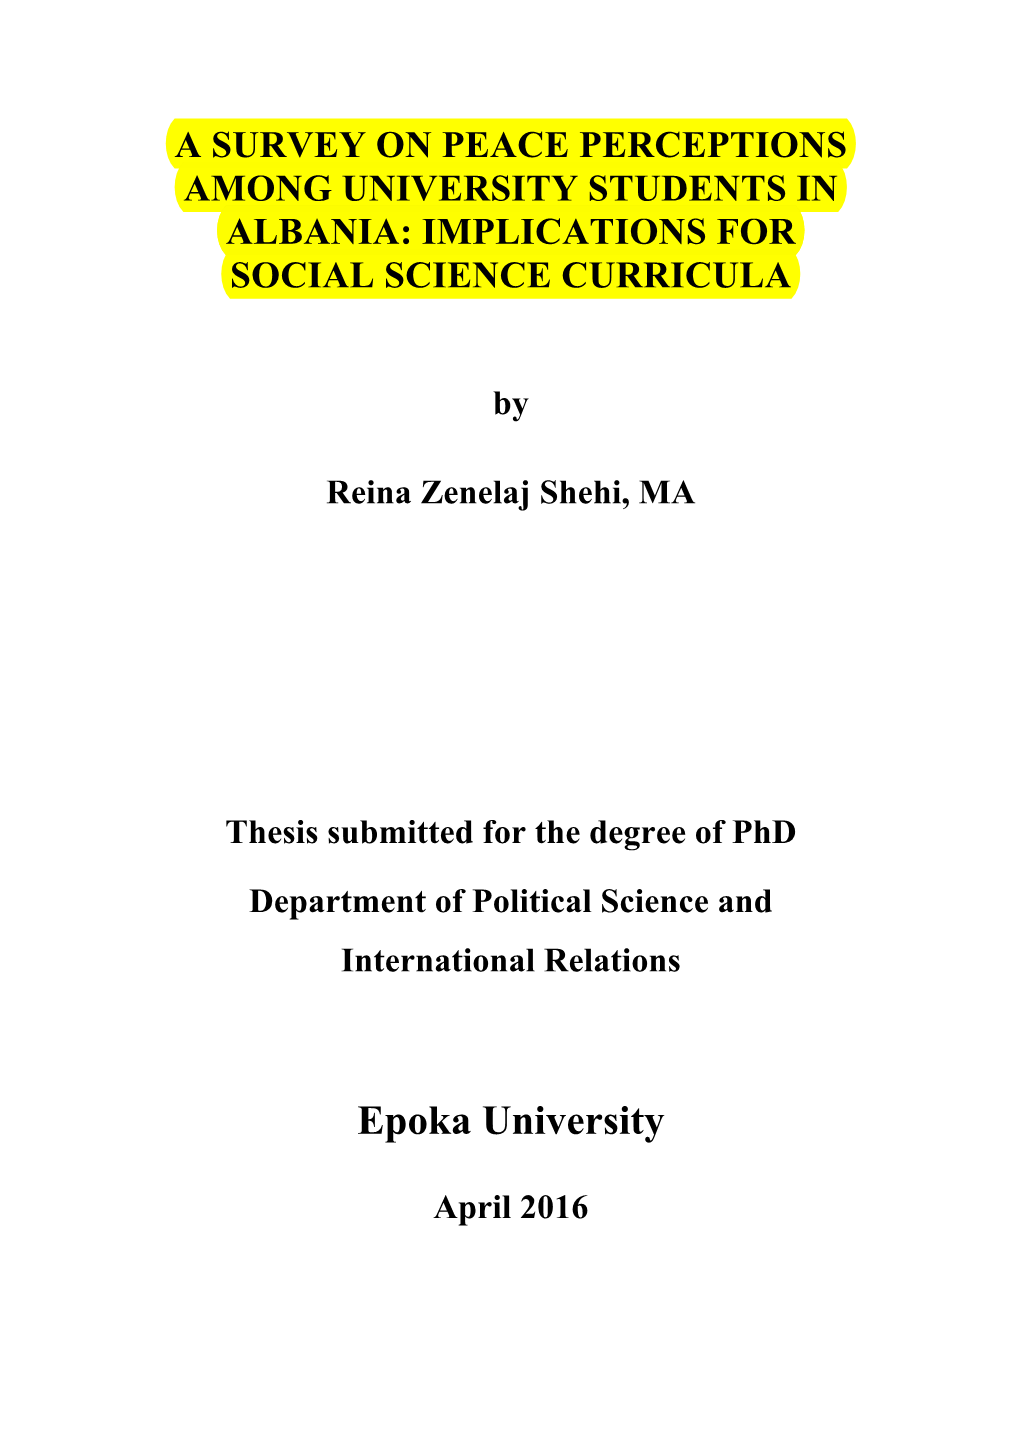 By Reina Zenelaj Shehi, MA Thesis Submitted for the Degree of Phd Department of Political Science and International Relations